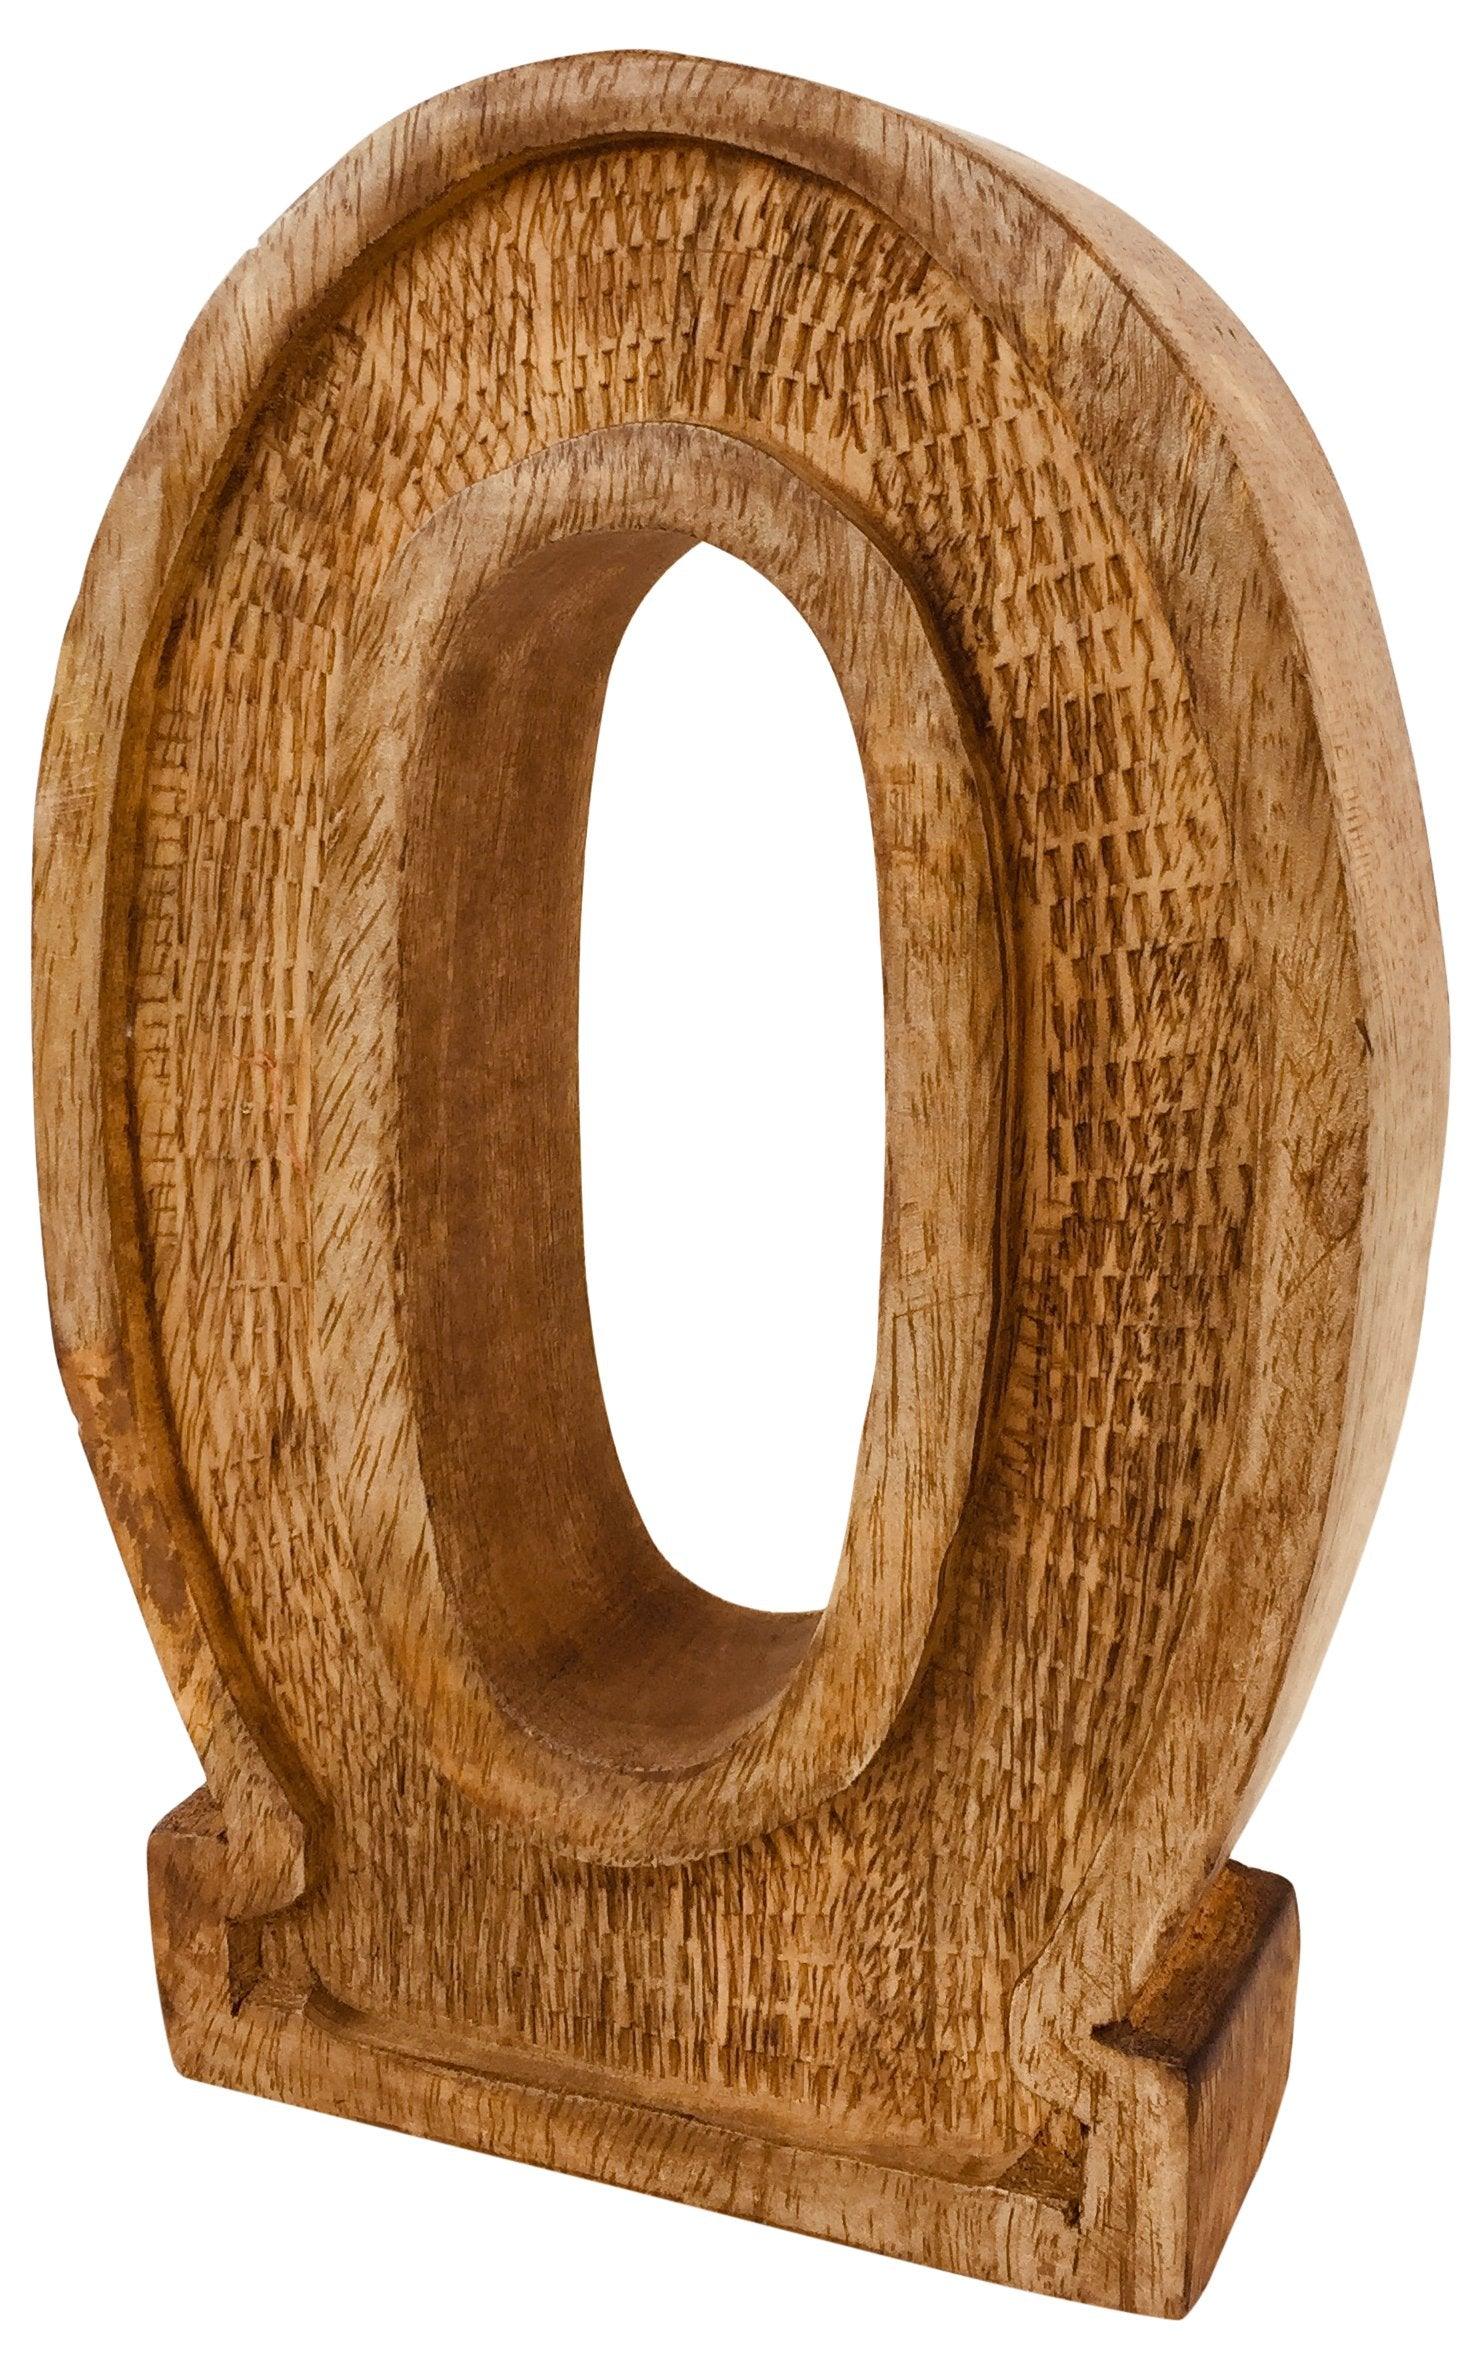 View Hand Carved Wooden Embossed Letter O information